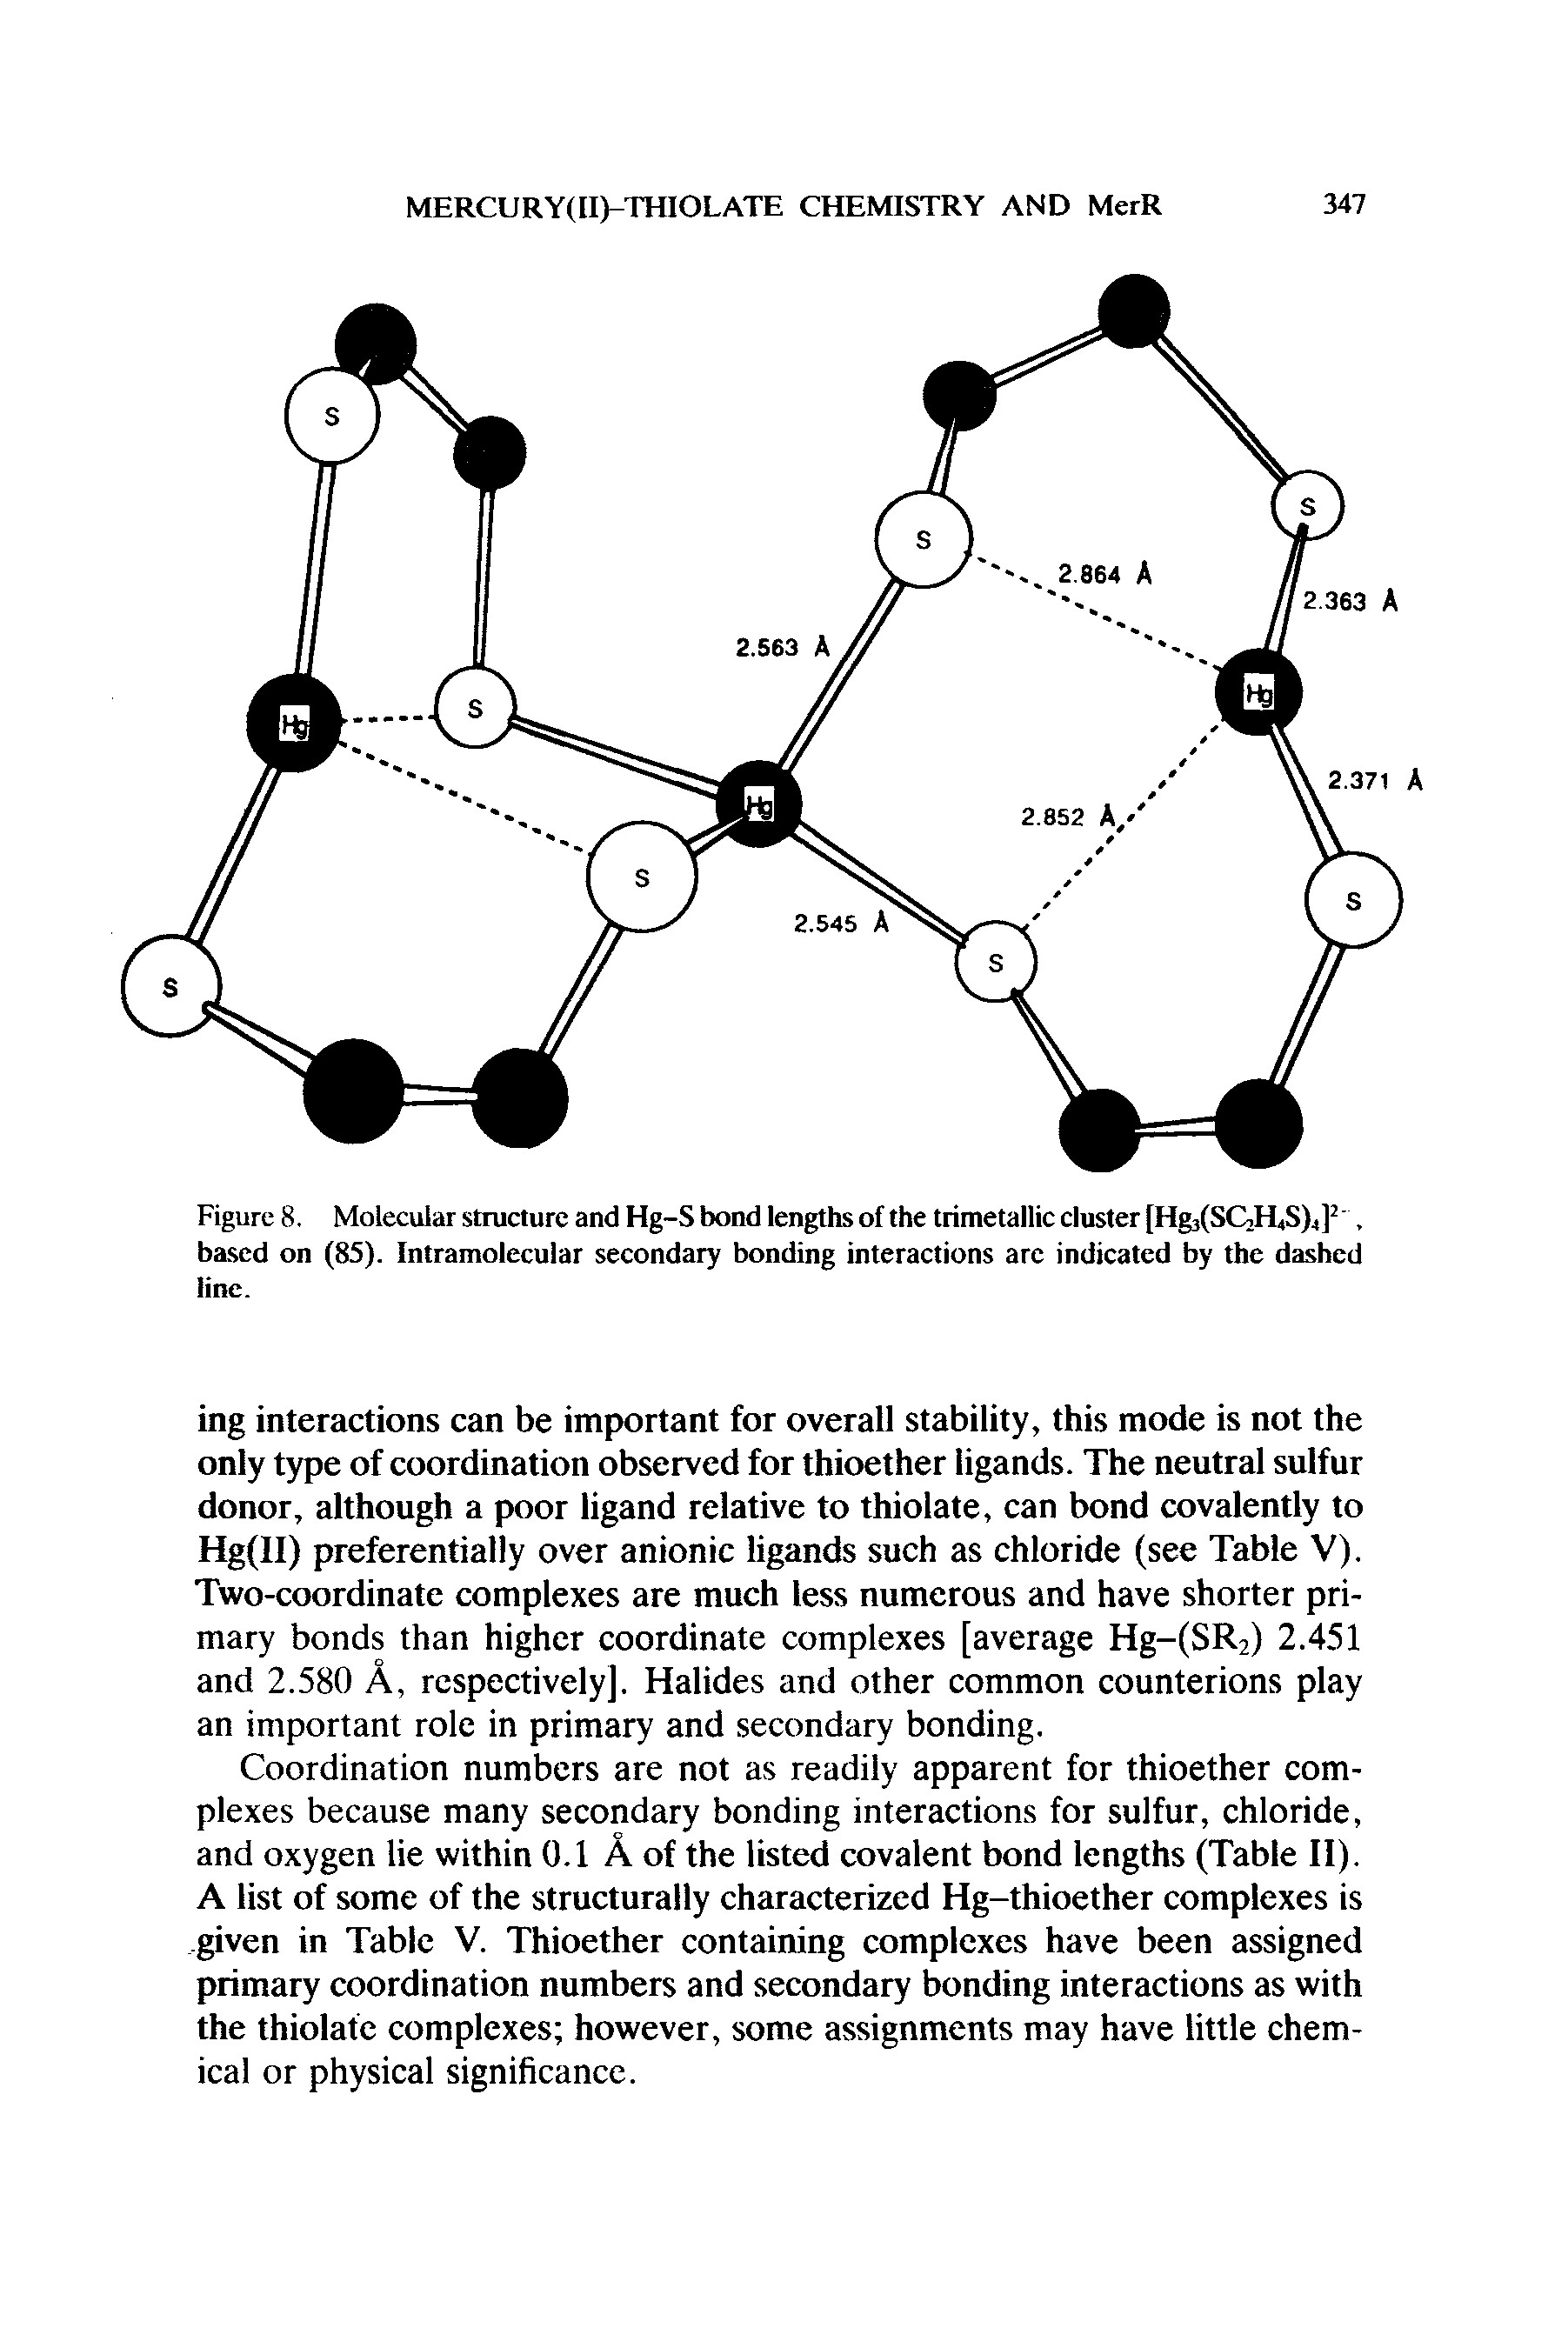 Figure 8. Molecular structure and Hg-S bond lengths of the trimetallic cluster [Hg3(SC2H4S)j], based on (85). Intramolecular secondary bonding interactions arc indicated by the dashed line.